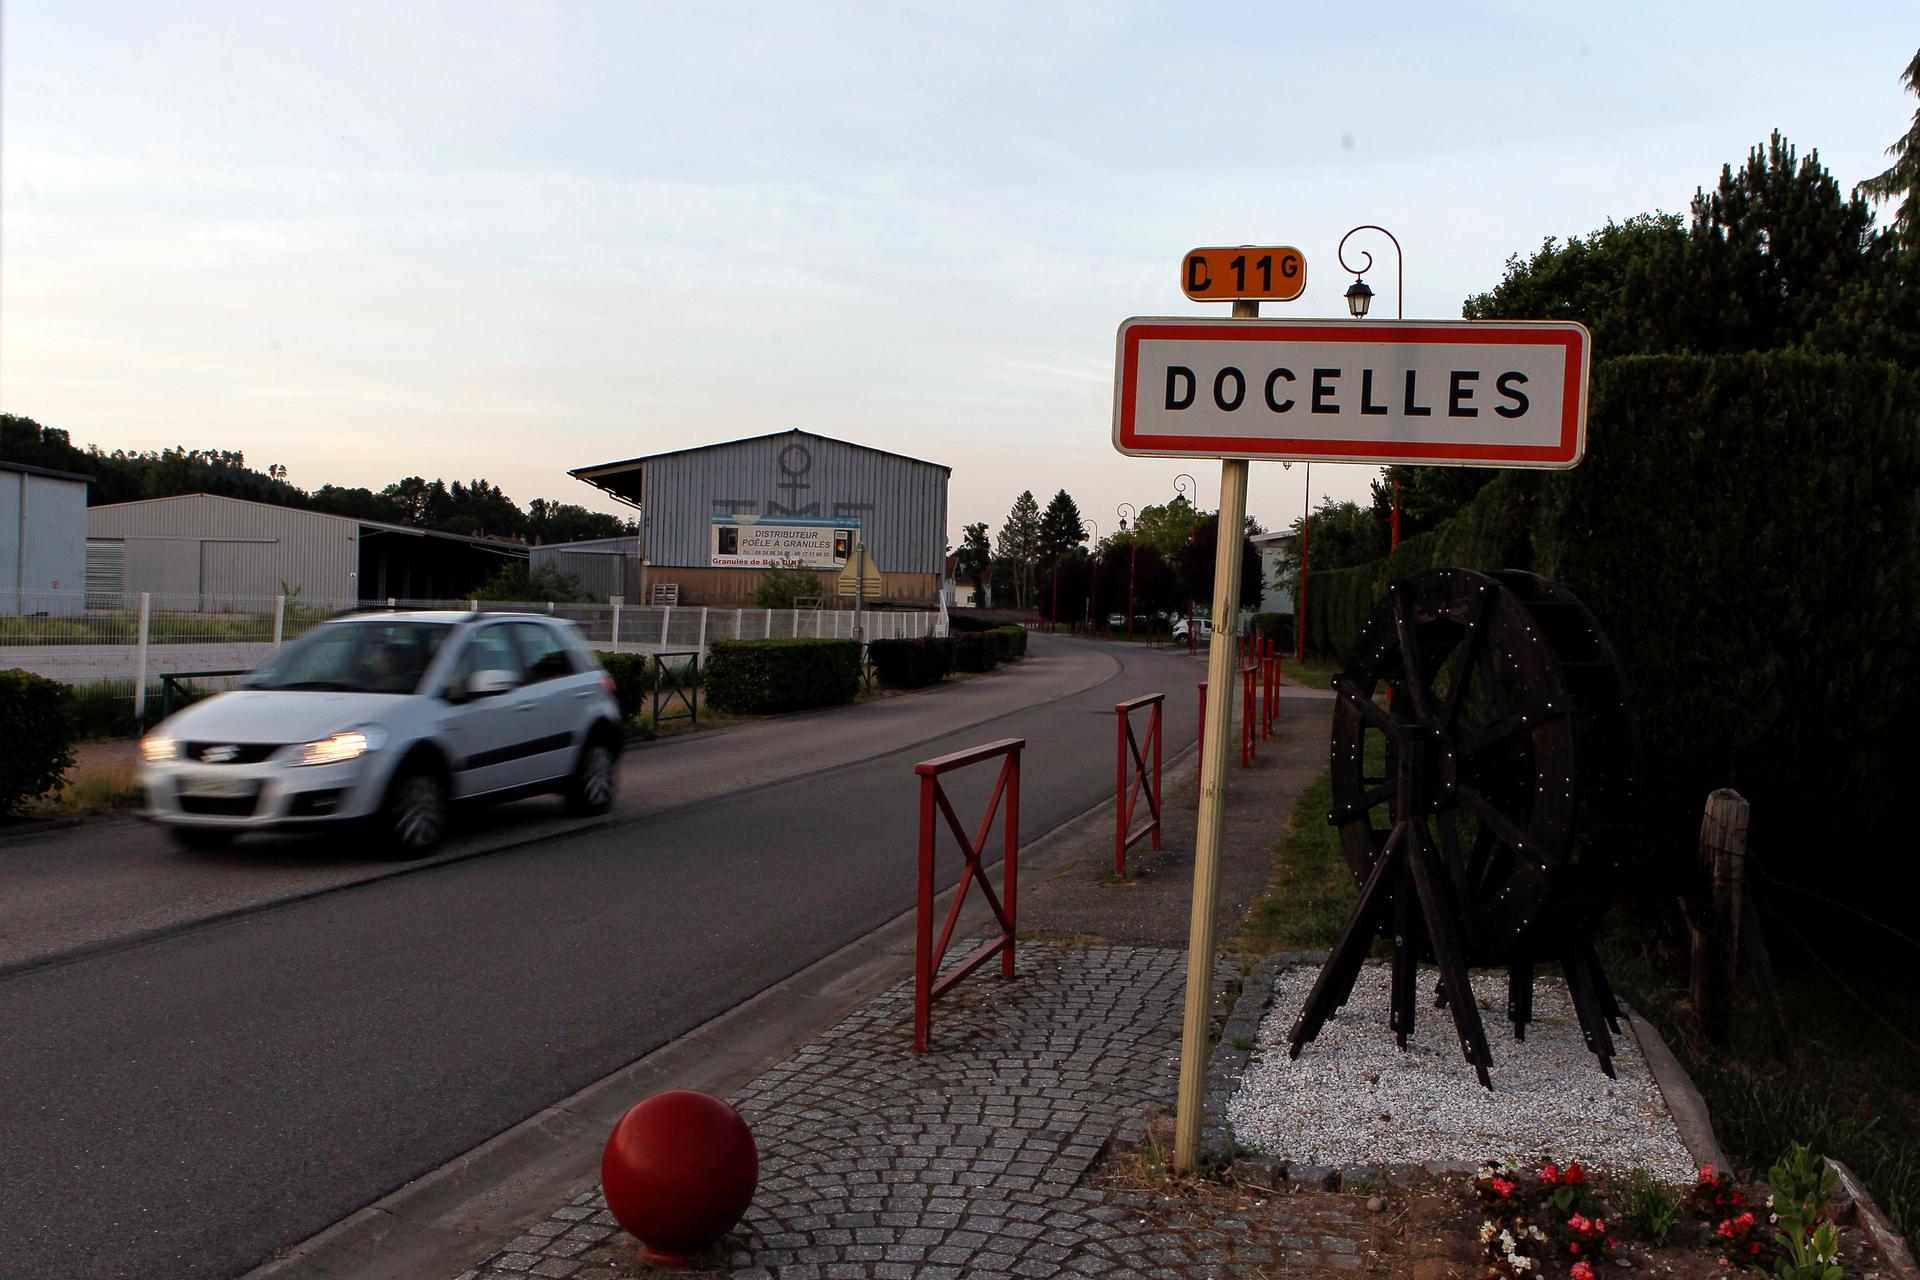 A car drives past the city entrance sign in Docelles, France, June 16, 2017.